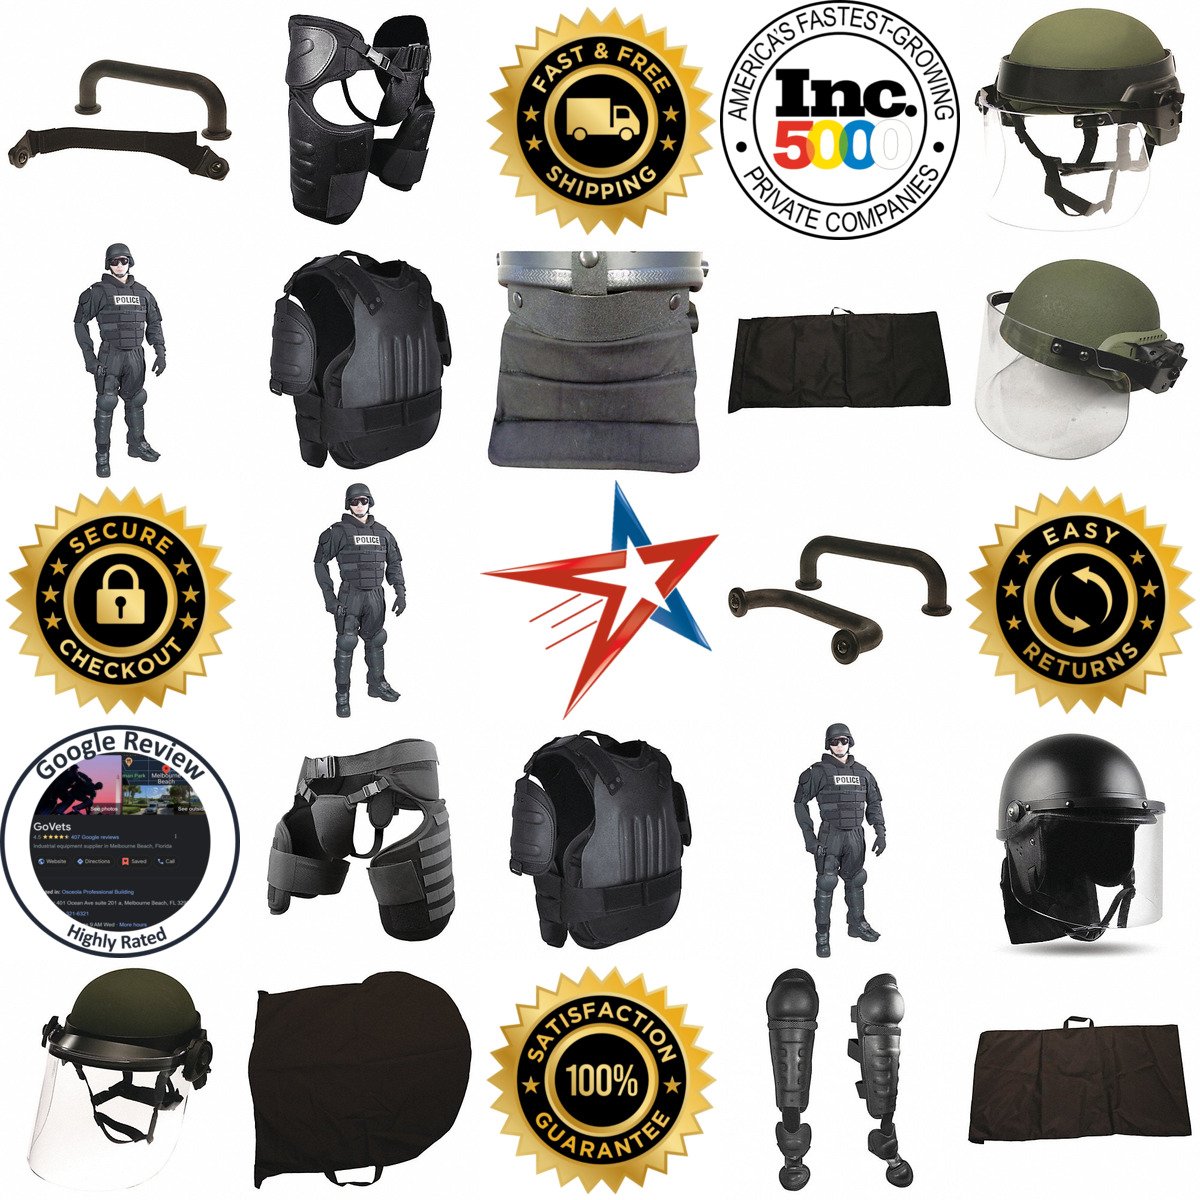 A selection of Riot Gear products on GoVets